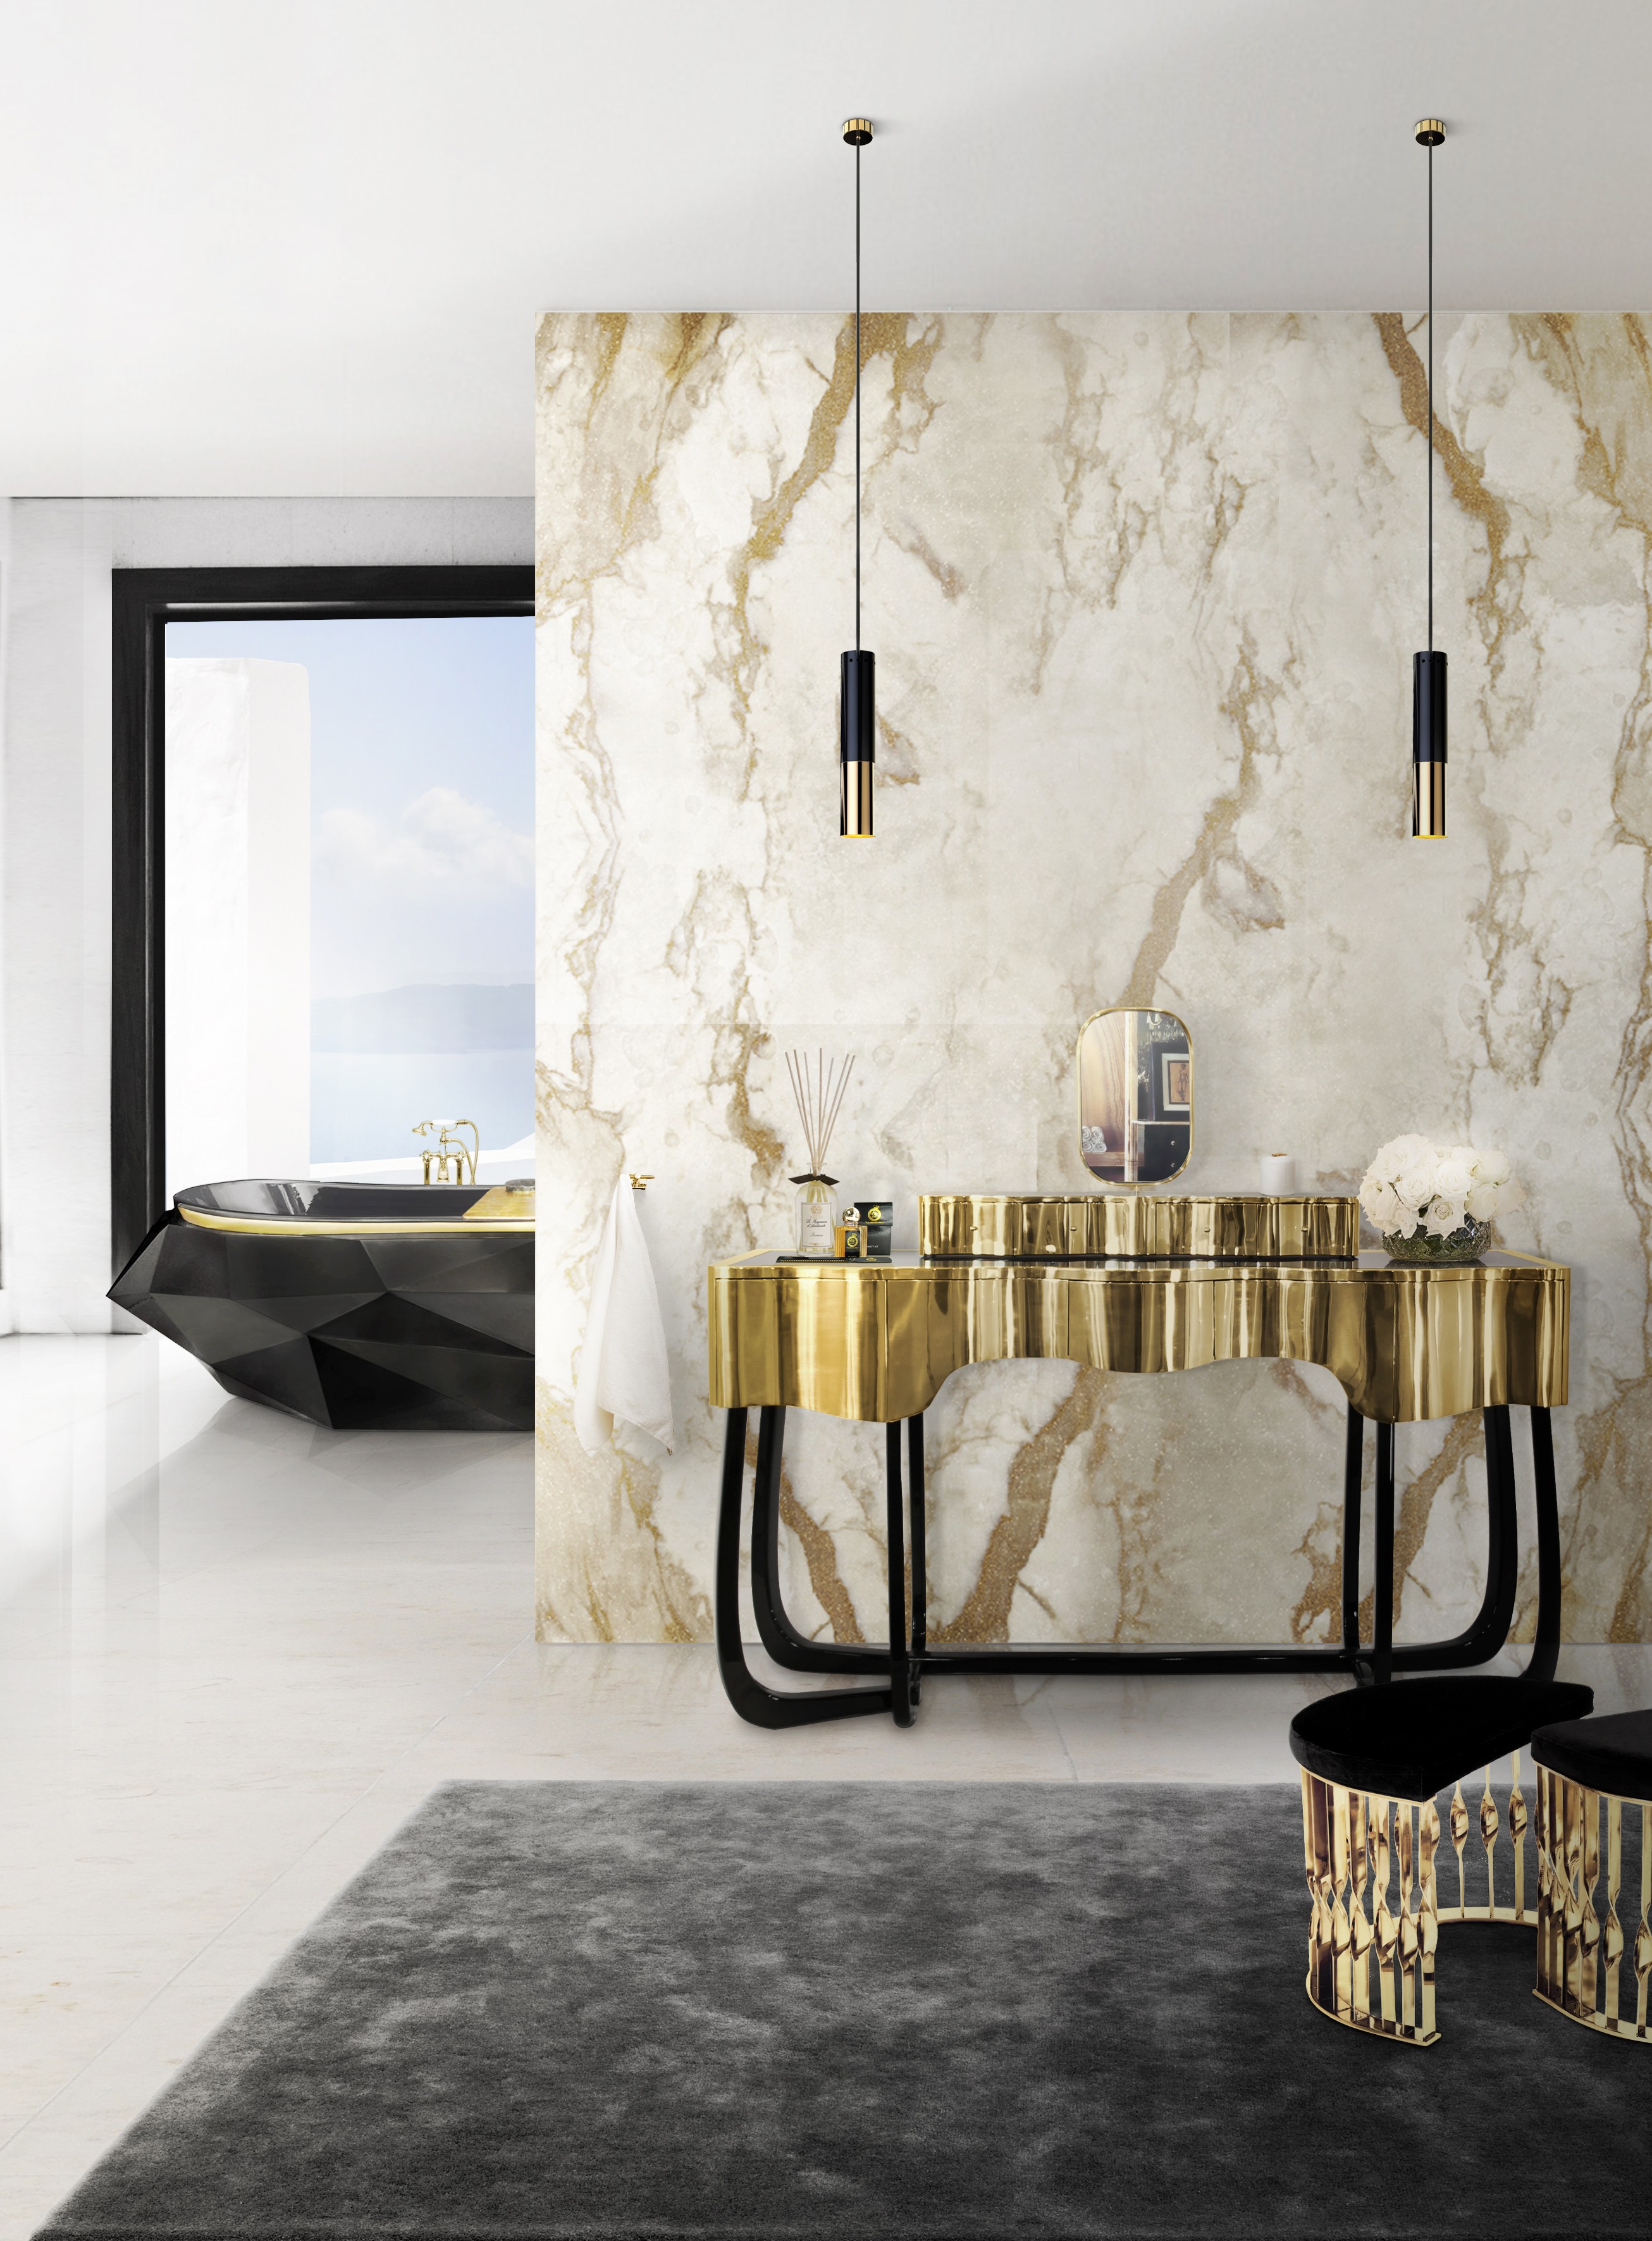 Introducing Glamorous Vanity Tables To Master Bedrooms vanity tables Introducing Glamorous Vanity Tables To Master Bedrooms a glorious bathroom with the sinuous dressing table mandy stool and the incredible diamond bathtub